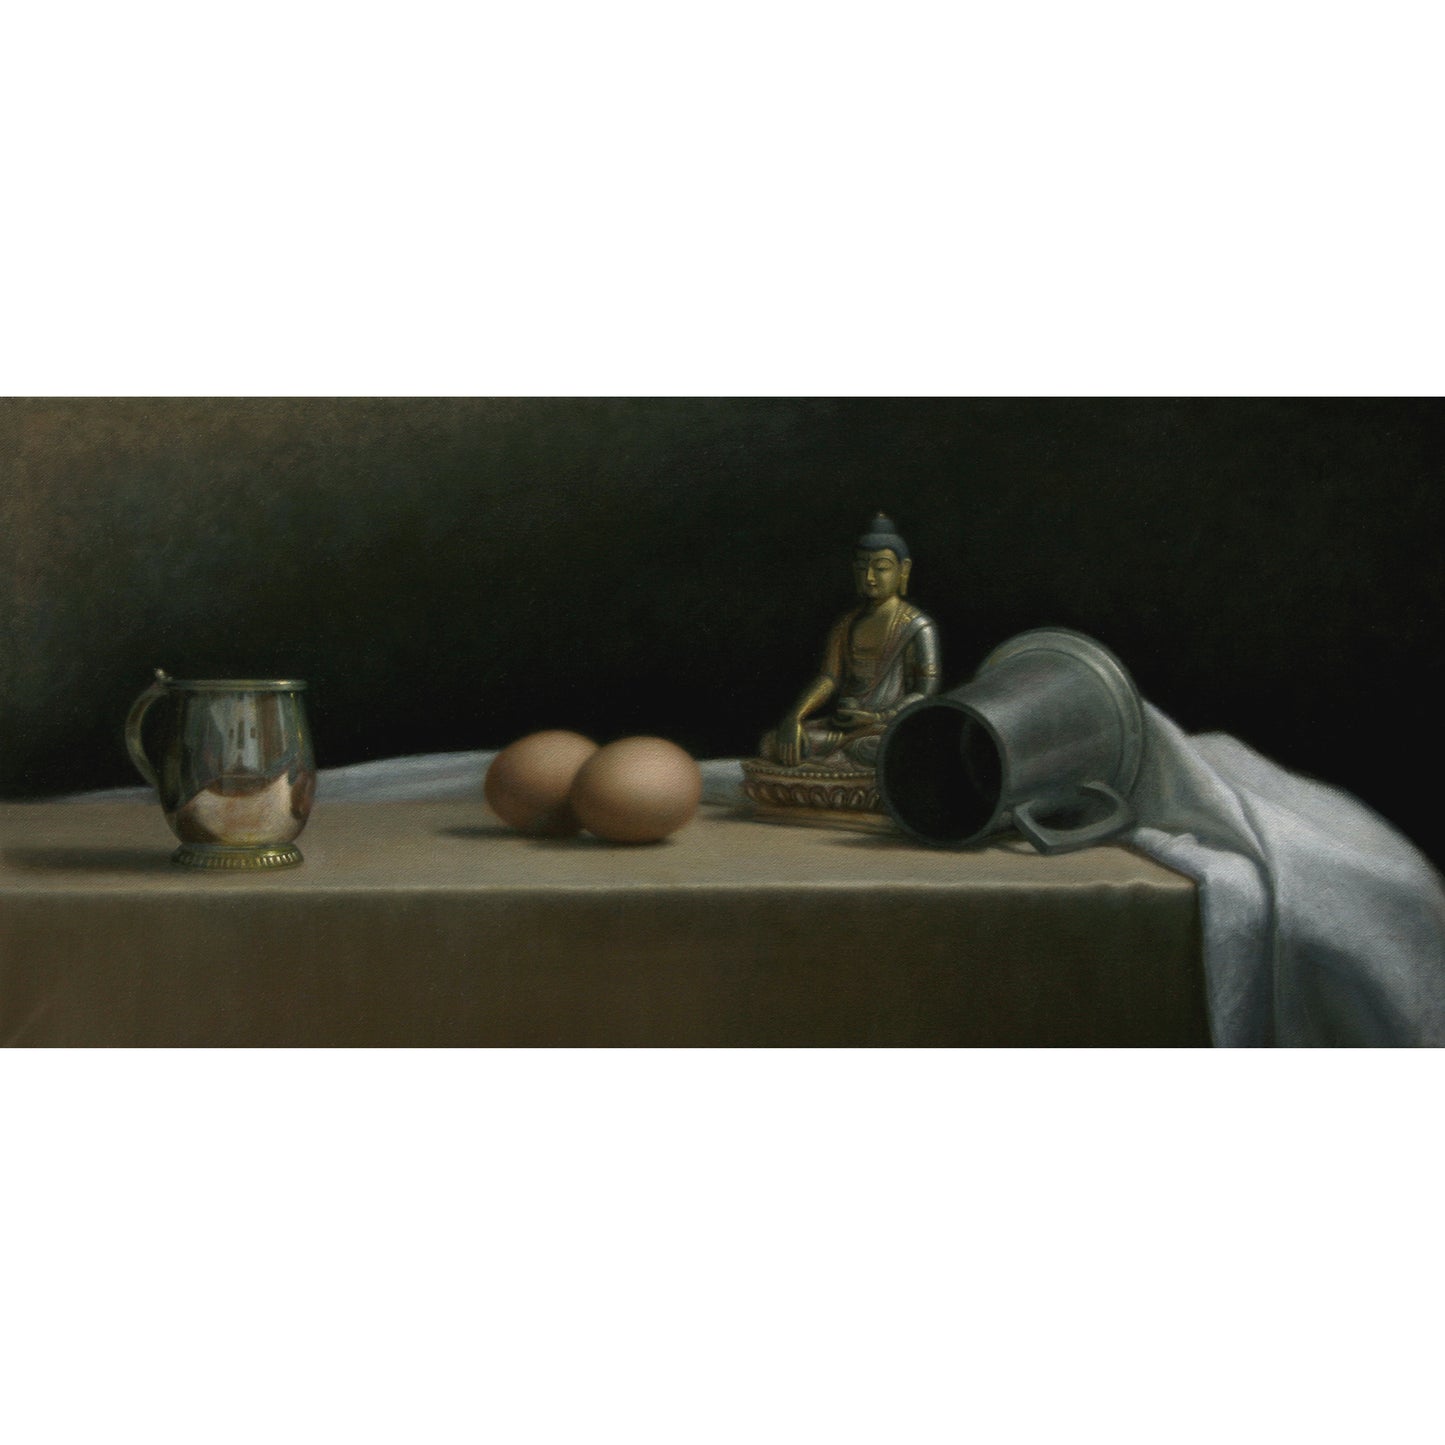 Original Painting: "Still Life with Eggs and Buddha"